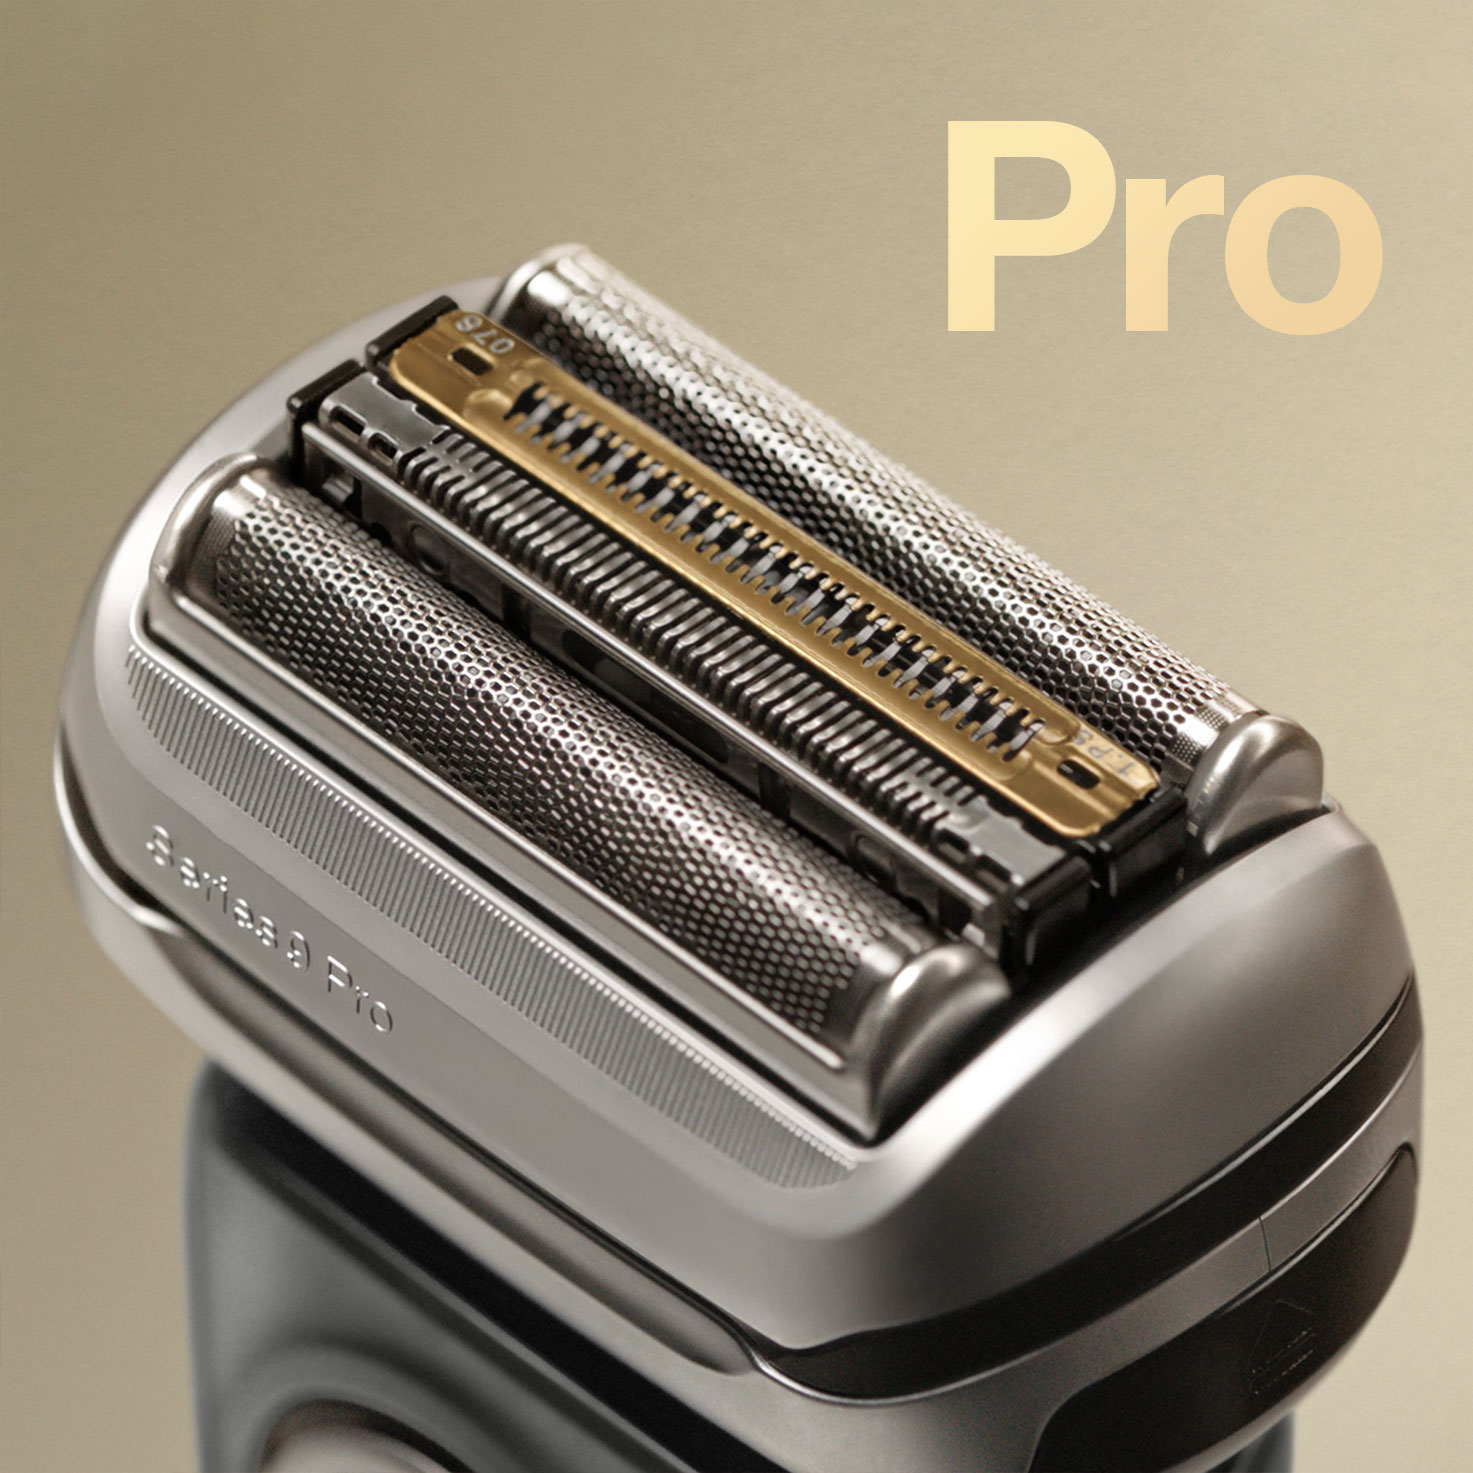 Series 9 Pro 9465cc Wet & Dry shaver with SmartCare center and travel case,  noble metal.